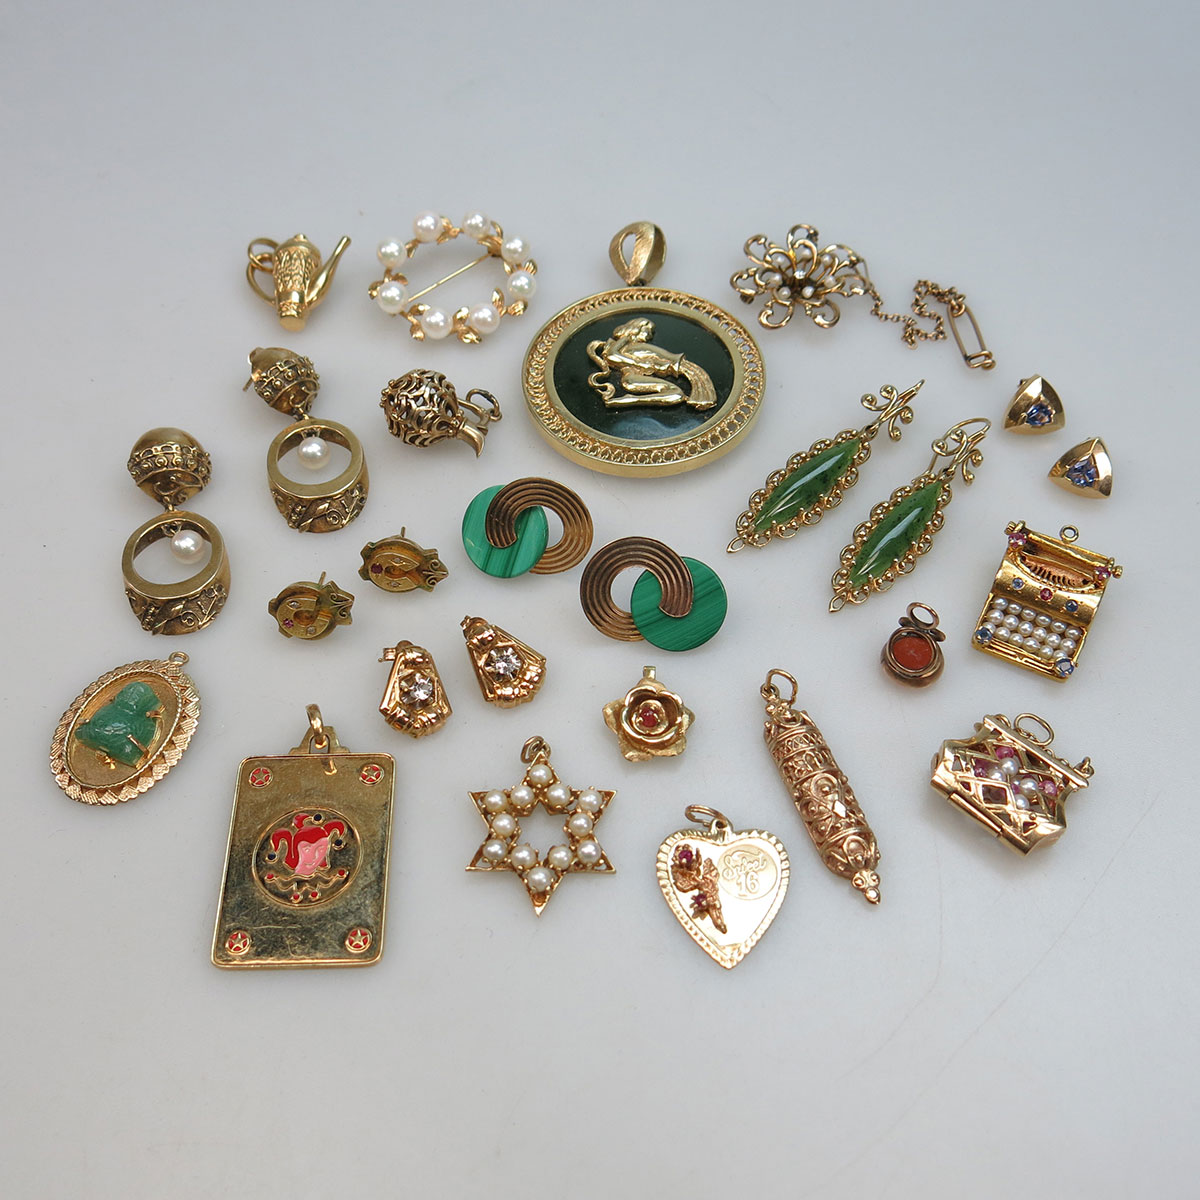 Small Quantity Of Gold Earrings, Pendants And Brooches